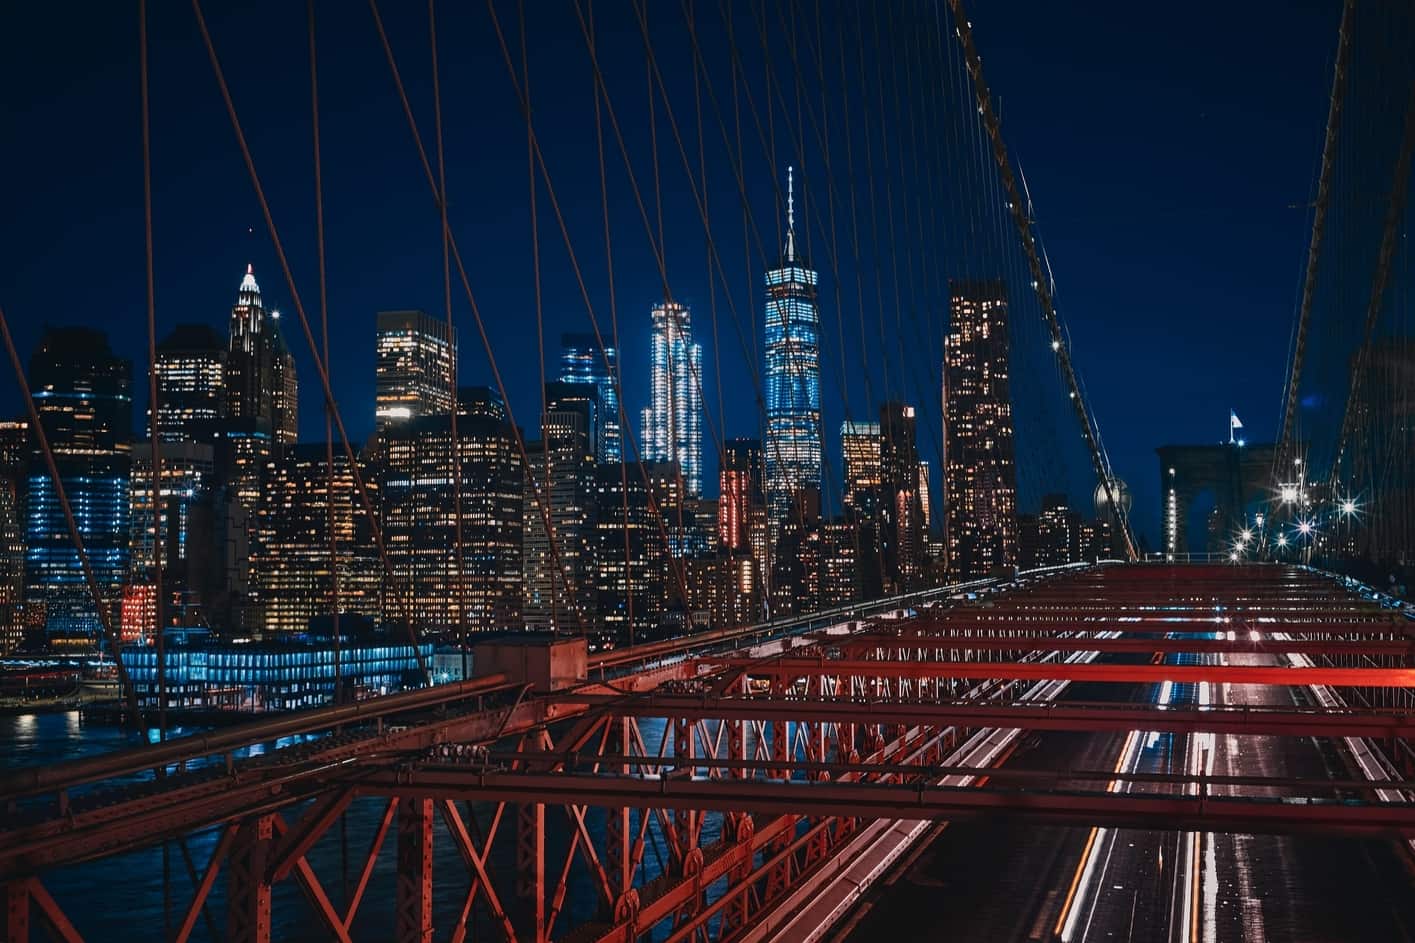 Brooklyn Bridge, unique things to do in nyc at night